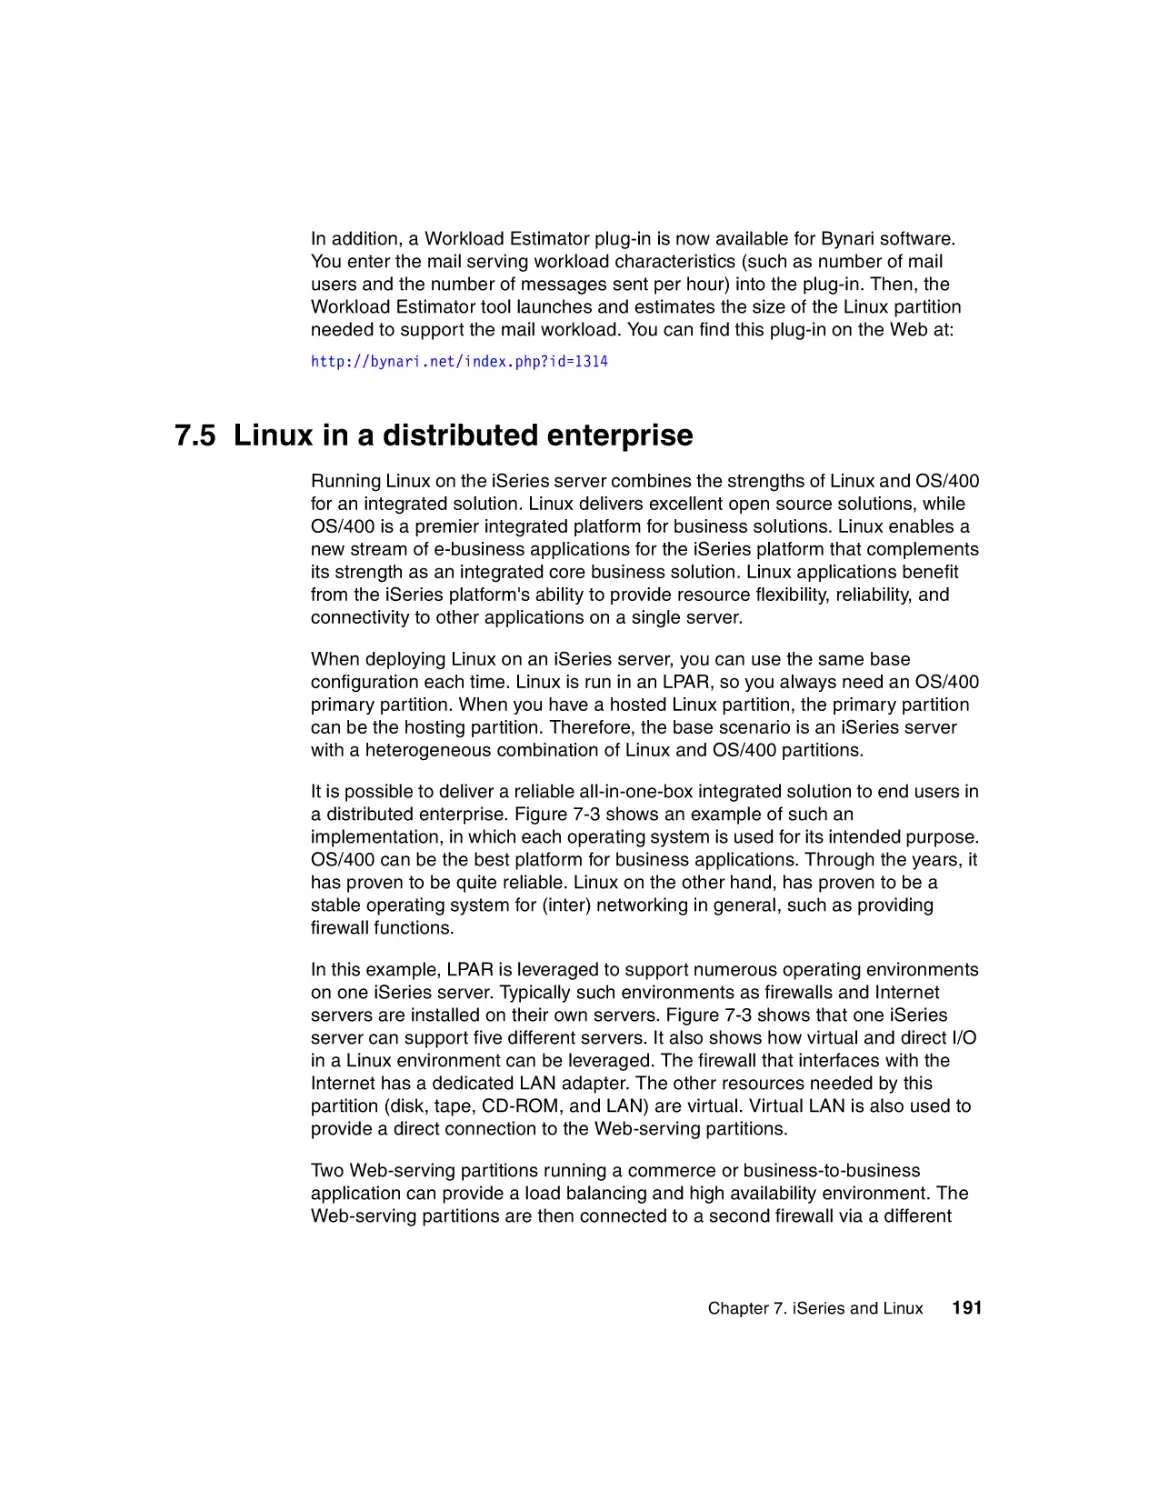 7.5 Linux in a distributed enterprise